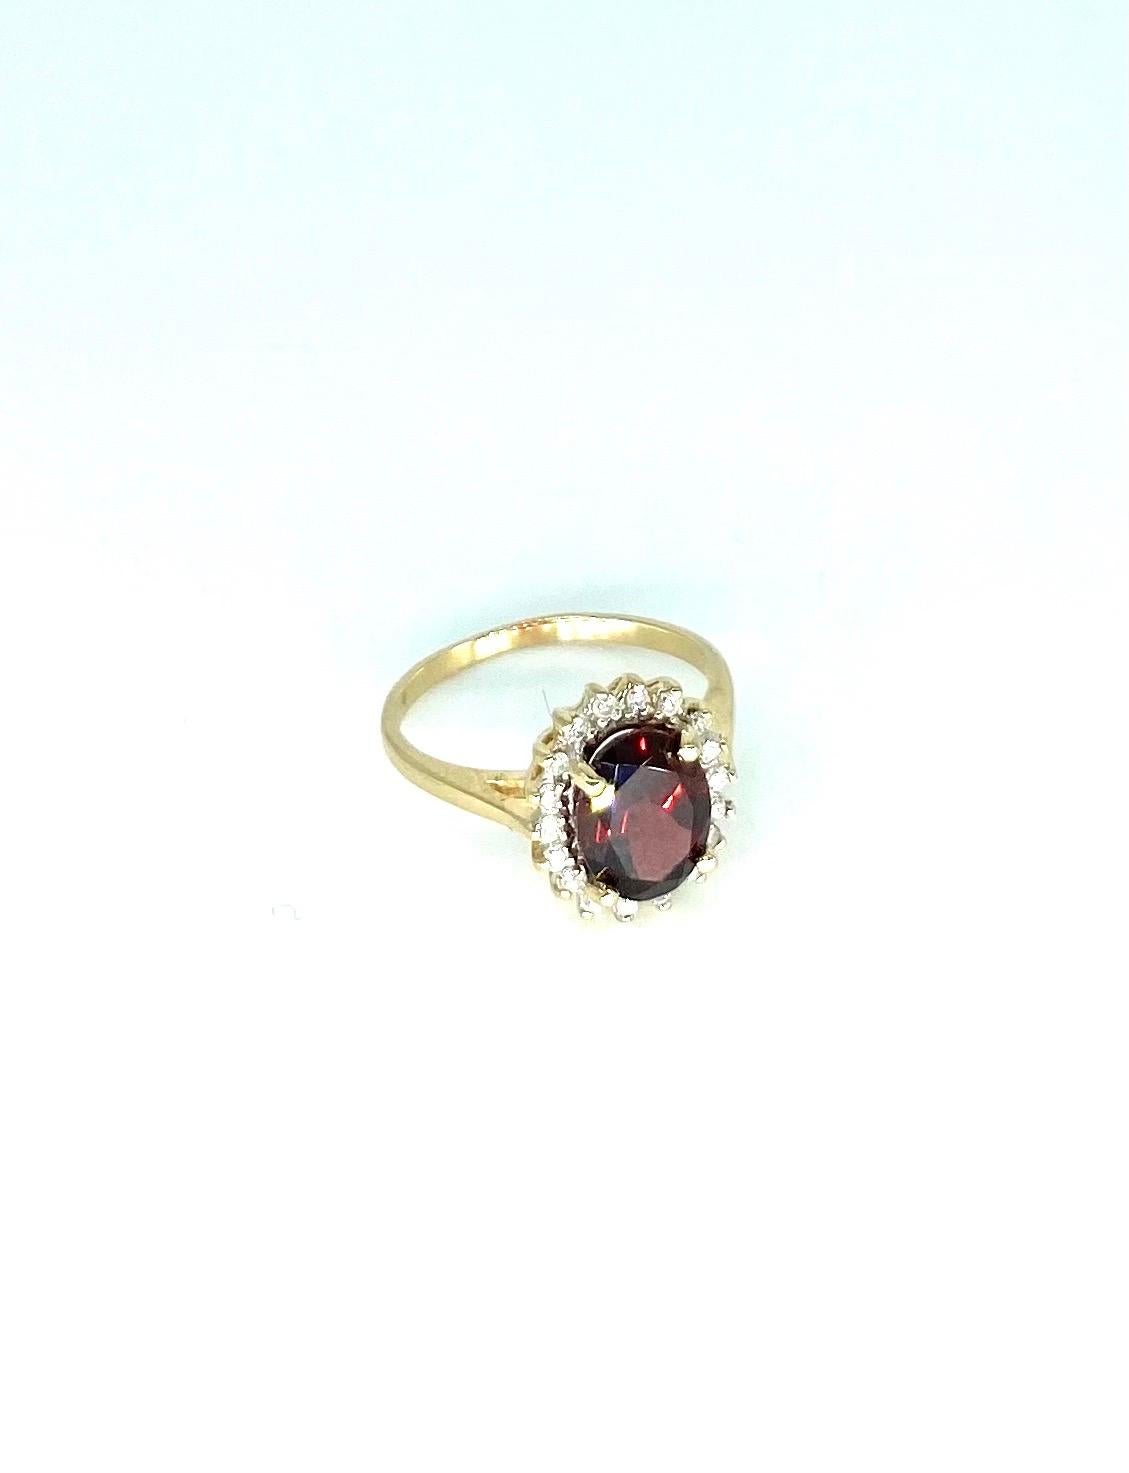 Vintage 2.50 Carat Garnet & Diamonds Cluster Ring. Beautiful shiny diamond and Garnet gemstone ring handcrafted in 14k solid gold. The surrounding diamonds are white natural very clean and sparkling diamonds. The approx weight of the Garnet gemstone